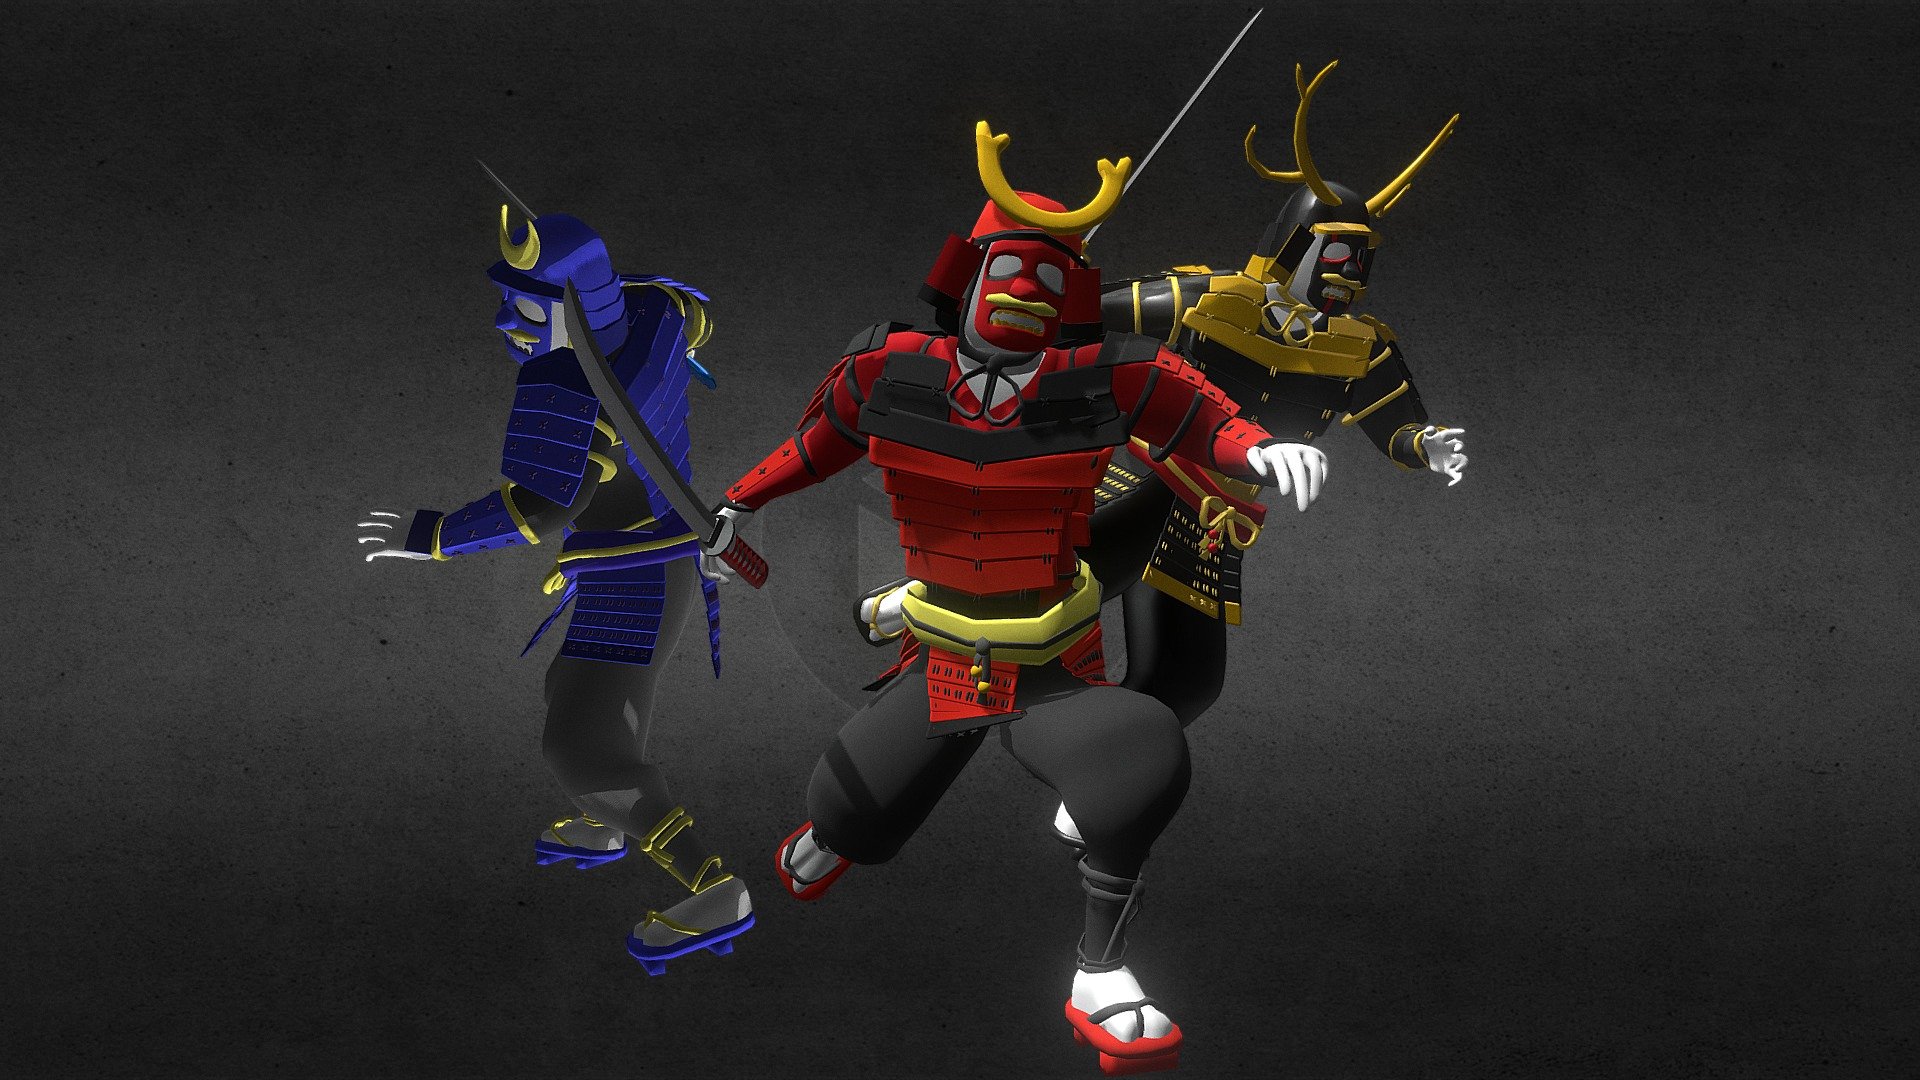 We introduce you to the male enemies of our game.
They are a mixture of several Japanese legends and the artistic freedoms of GHXST:
Samurais, noppera-bō, yūrei and nō theater mask.
All made with 3DS Max 3d model